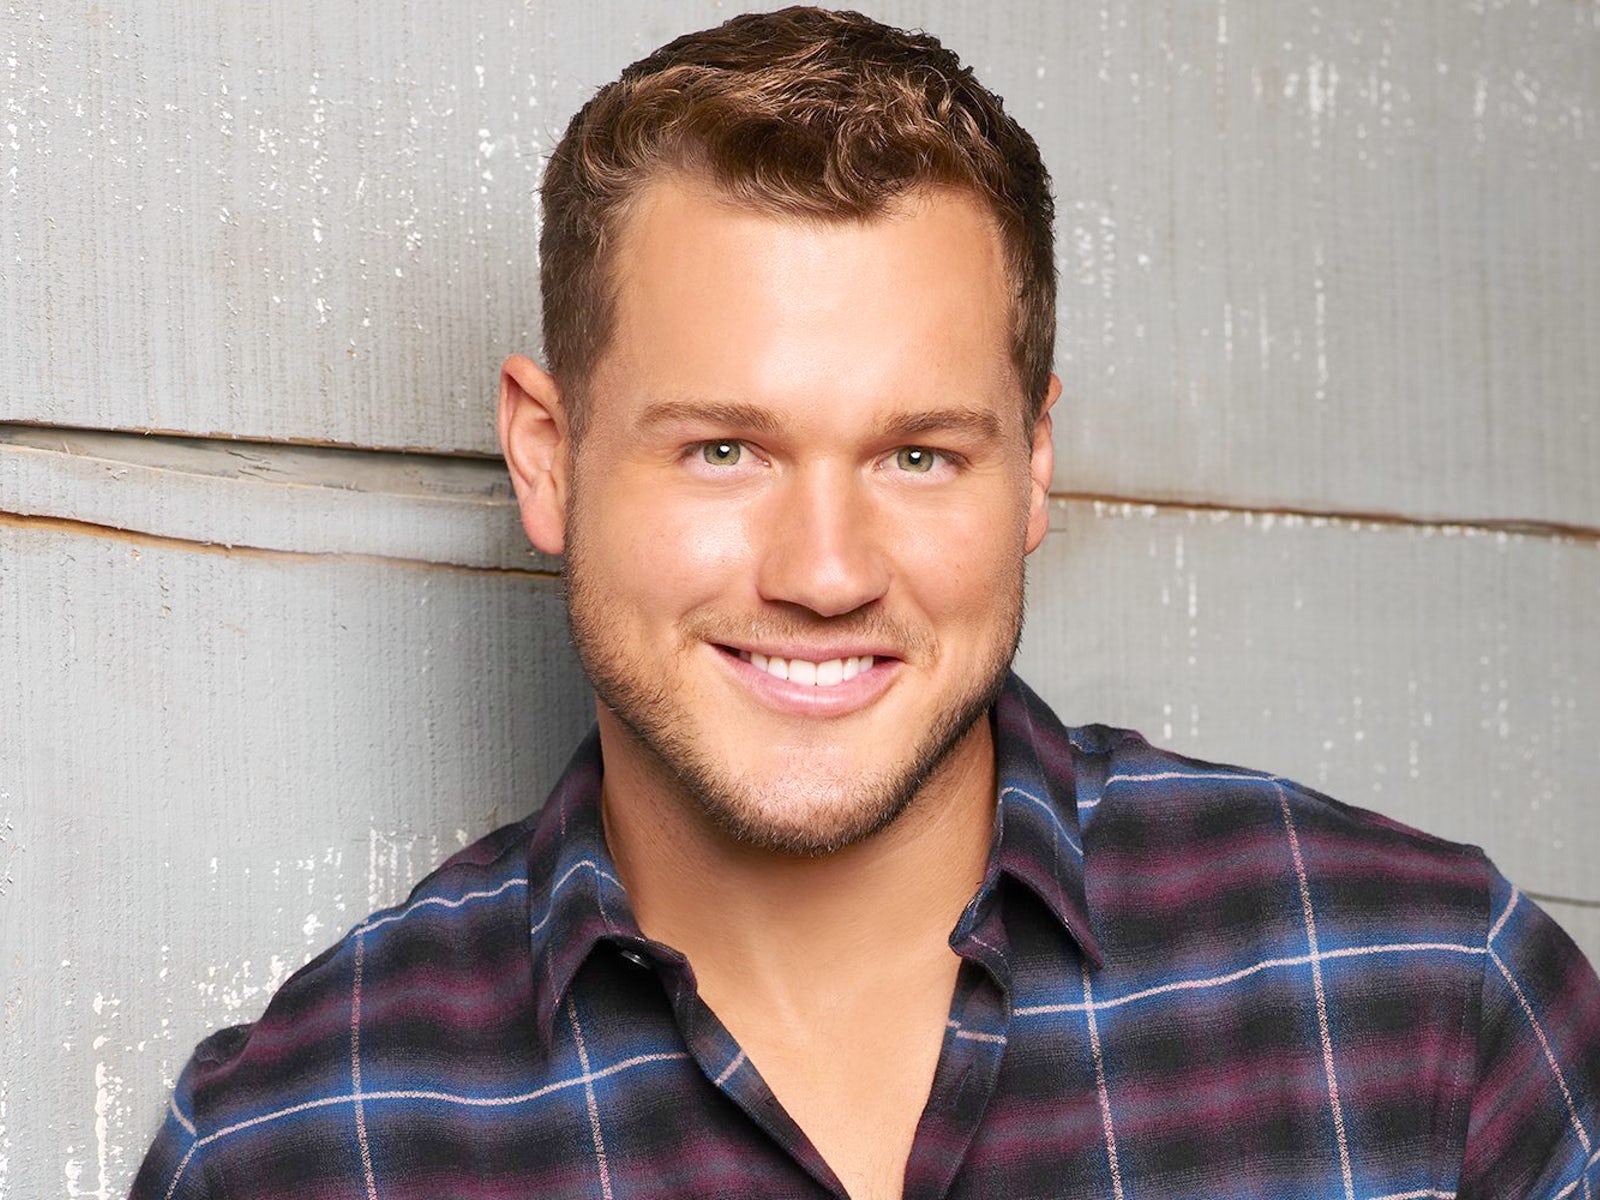 Colton Underwood returns to Instagram with touching post after coming